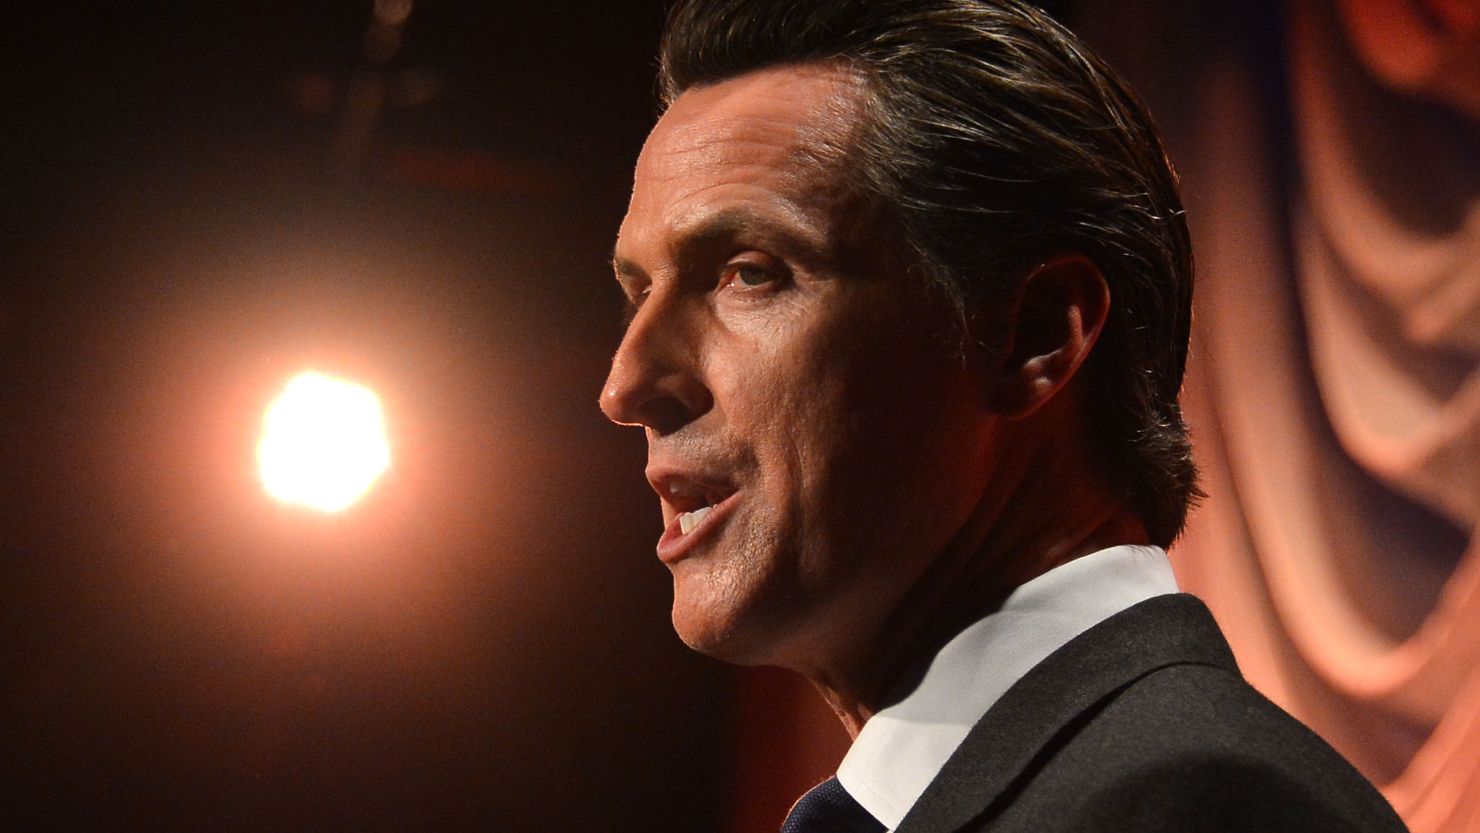 California Lt. Gov. Gavin Newsom is calling for a new model that brings government into the world of 21st century technology.